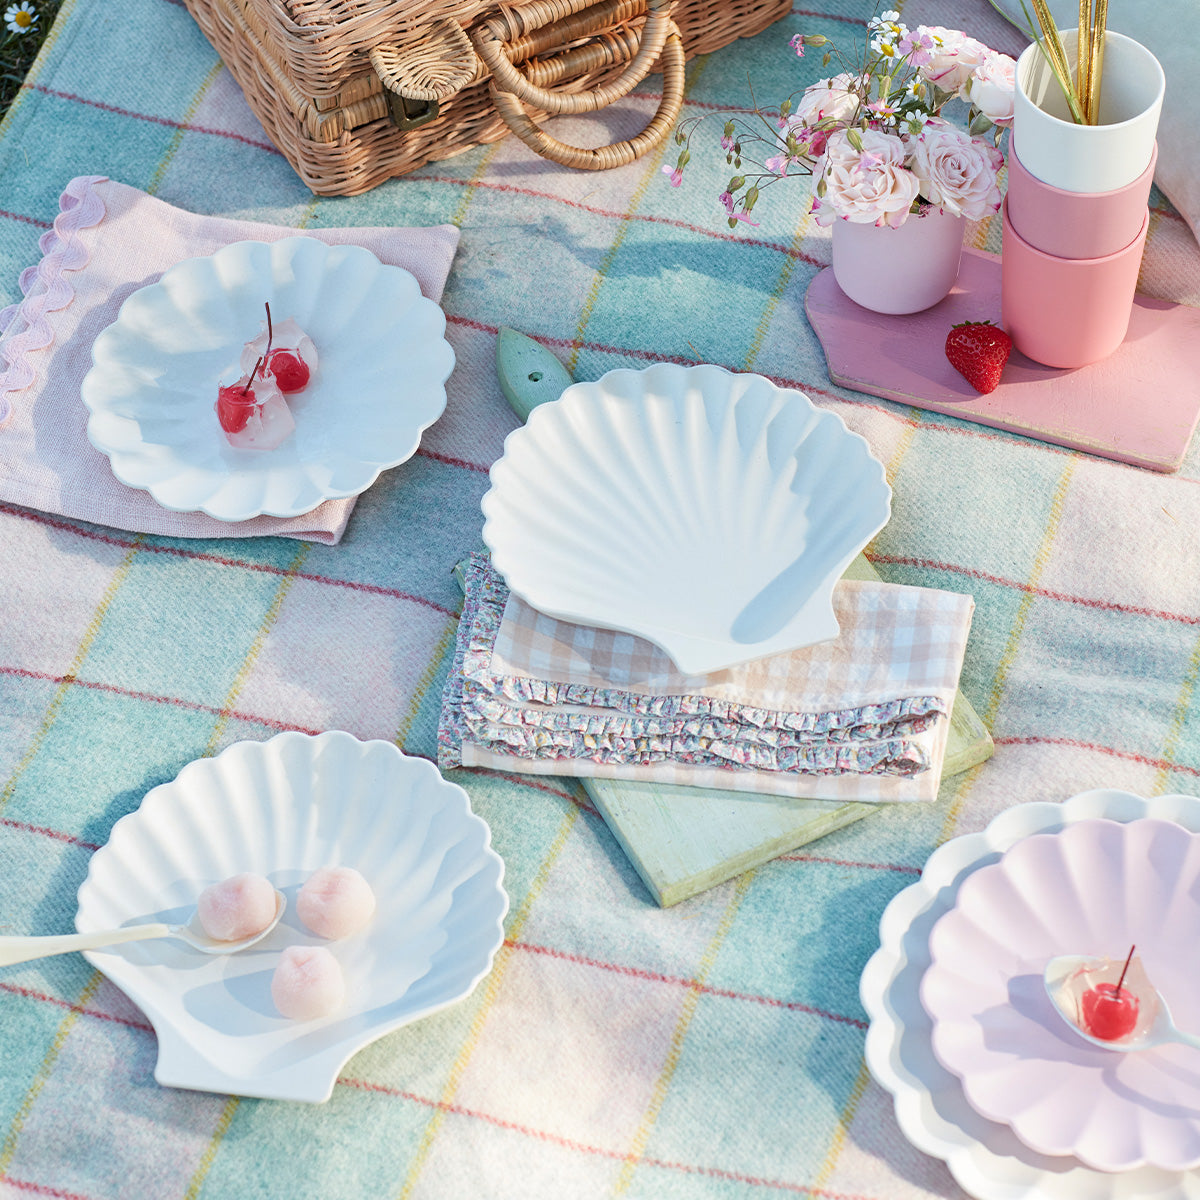 Our shell plates, crafted from a bamboo mix, will look amazing as beach picnic plates, or for a mermaid party or under-the-sea party.